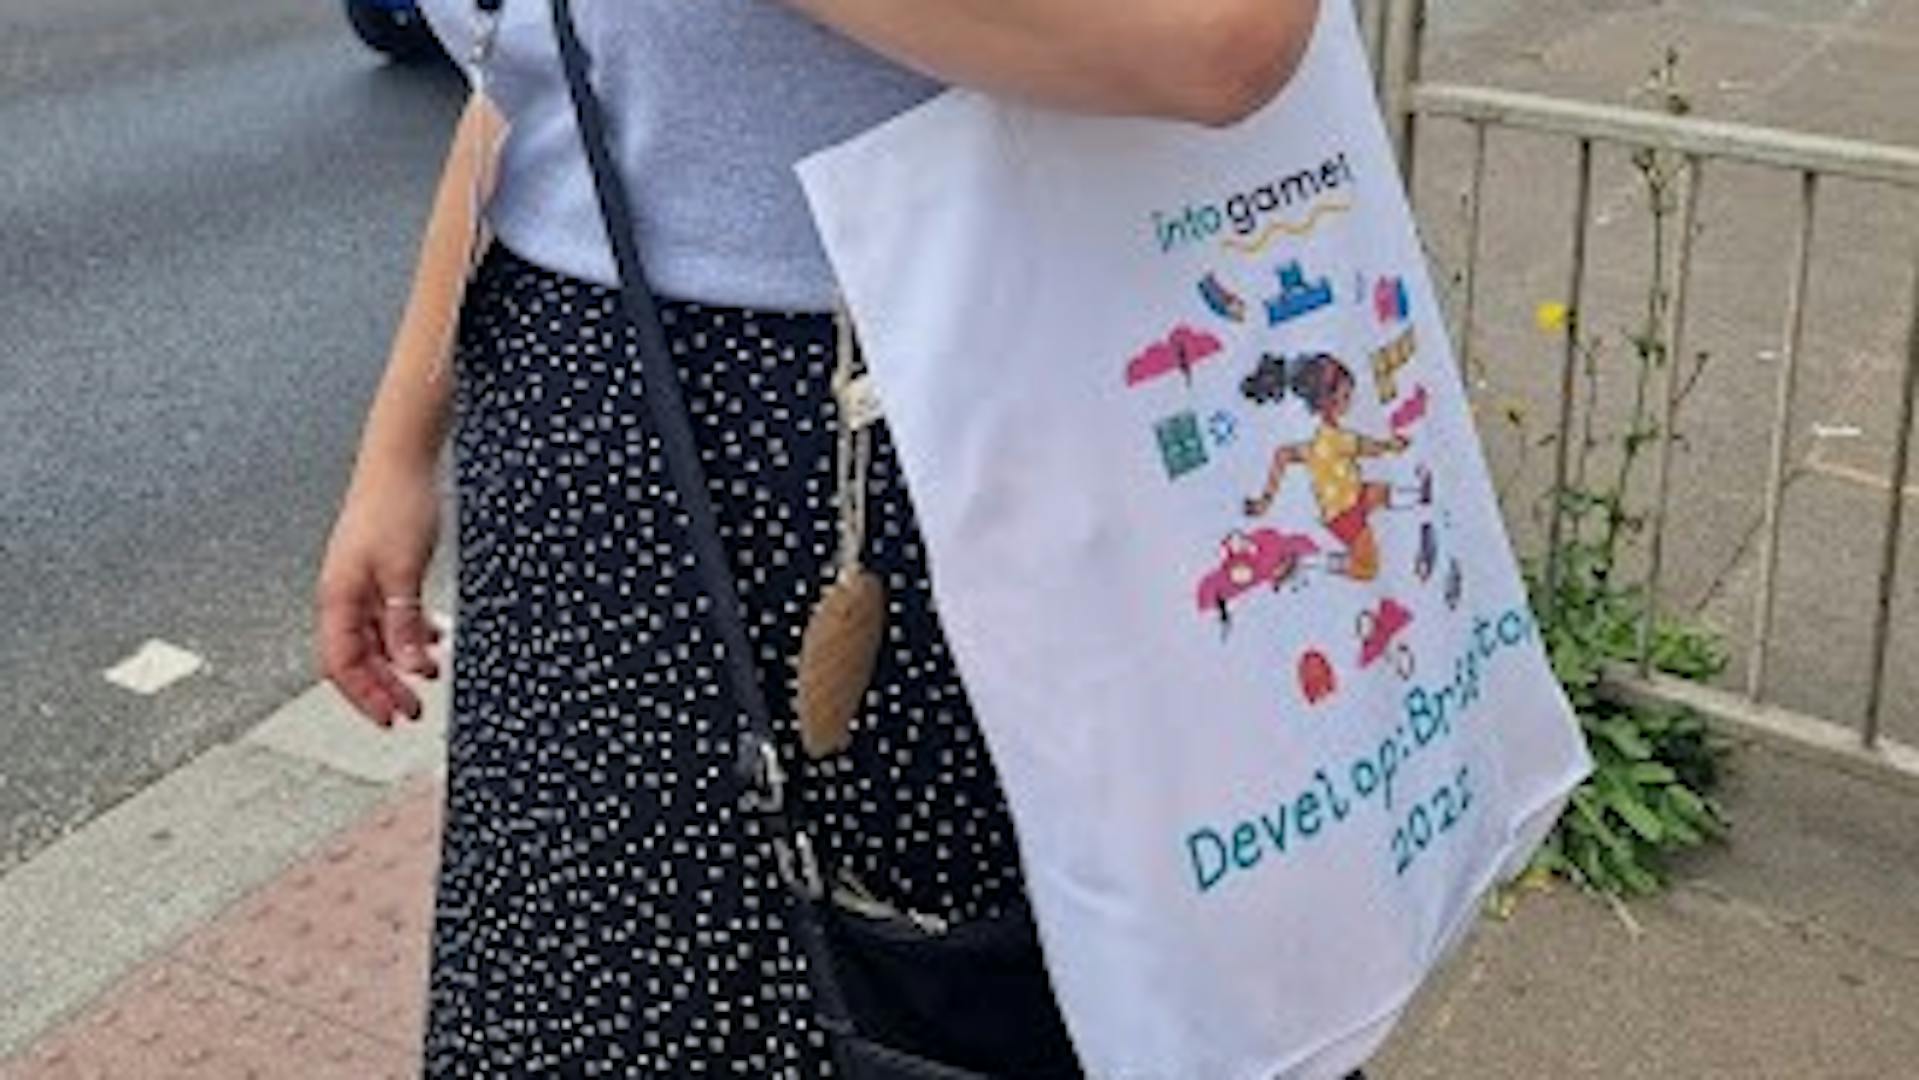 The snazzy merch - tote bag!